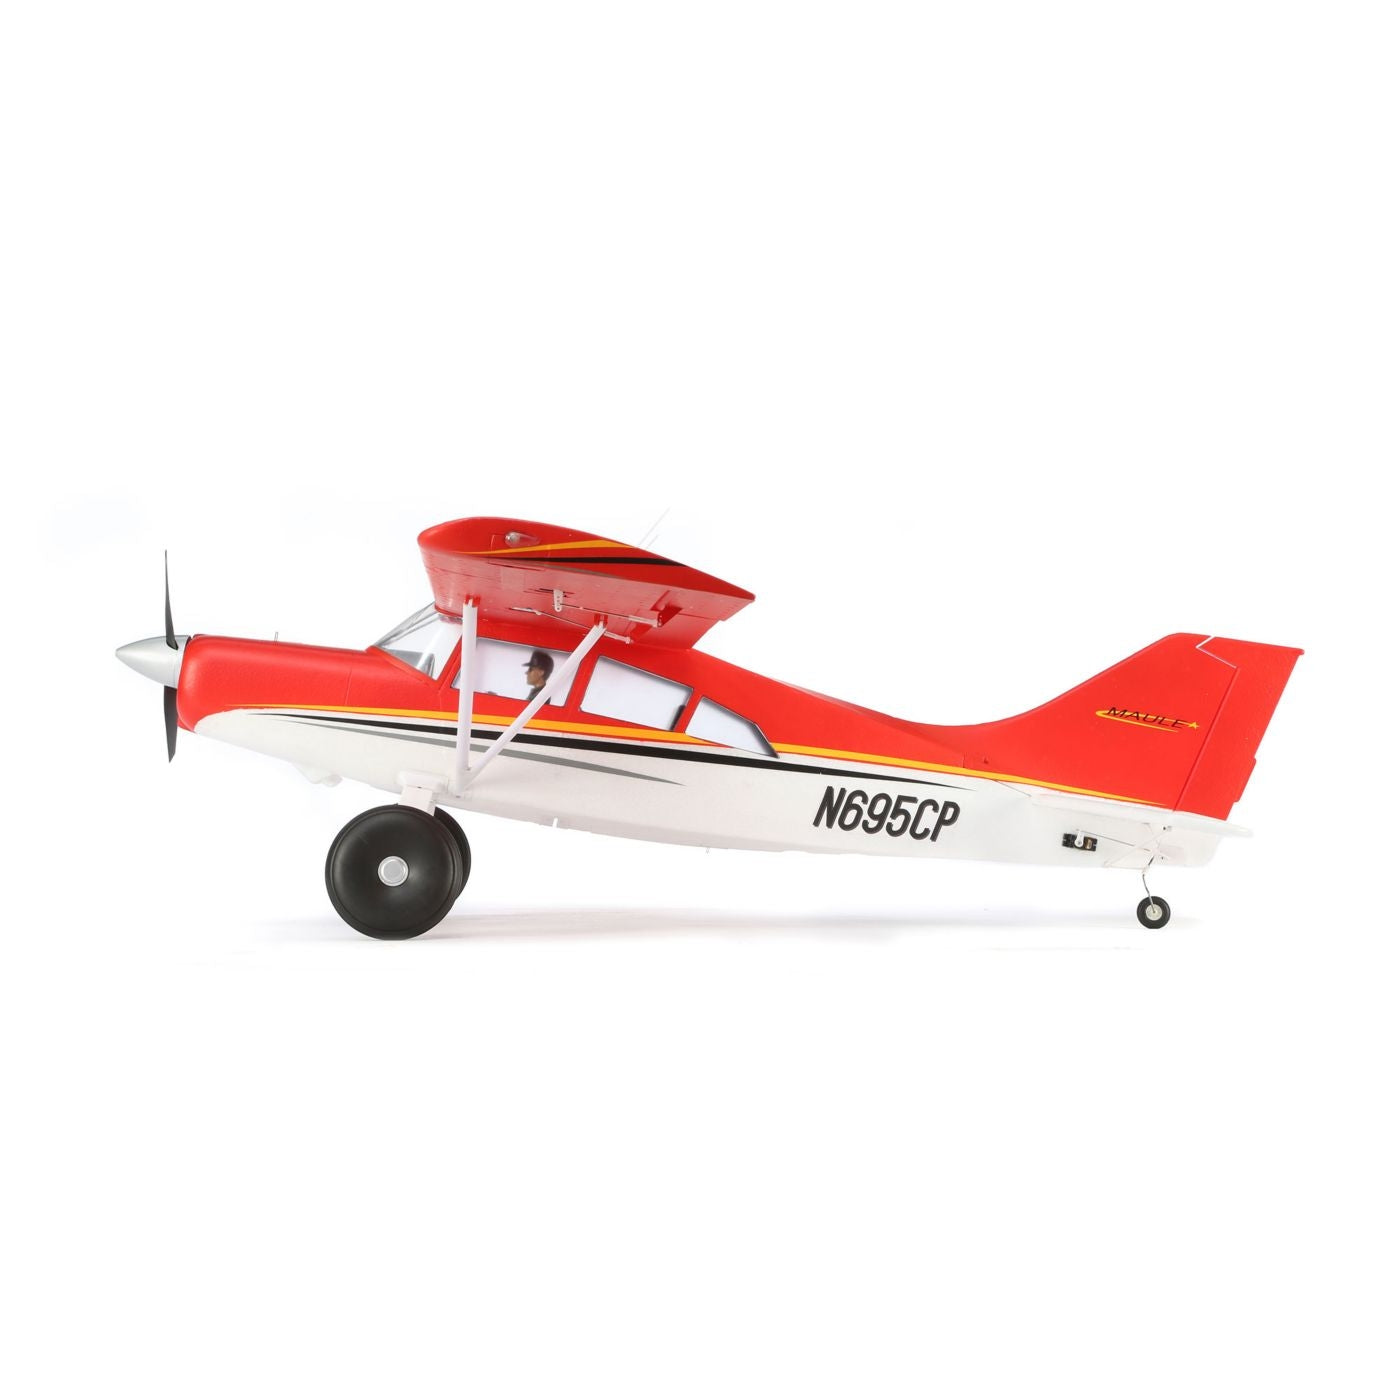 E-Flite Maule M-7 1.5m BNF Basic with AS3X and SAFE Select (includes Floats) EFL53500